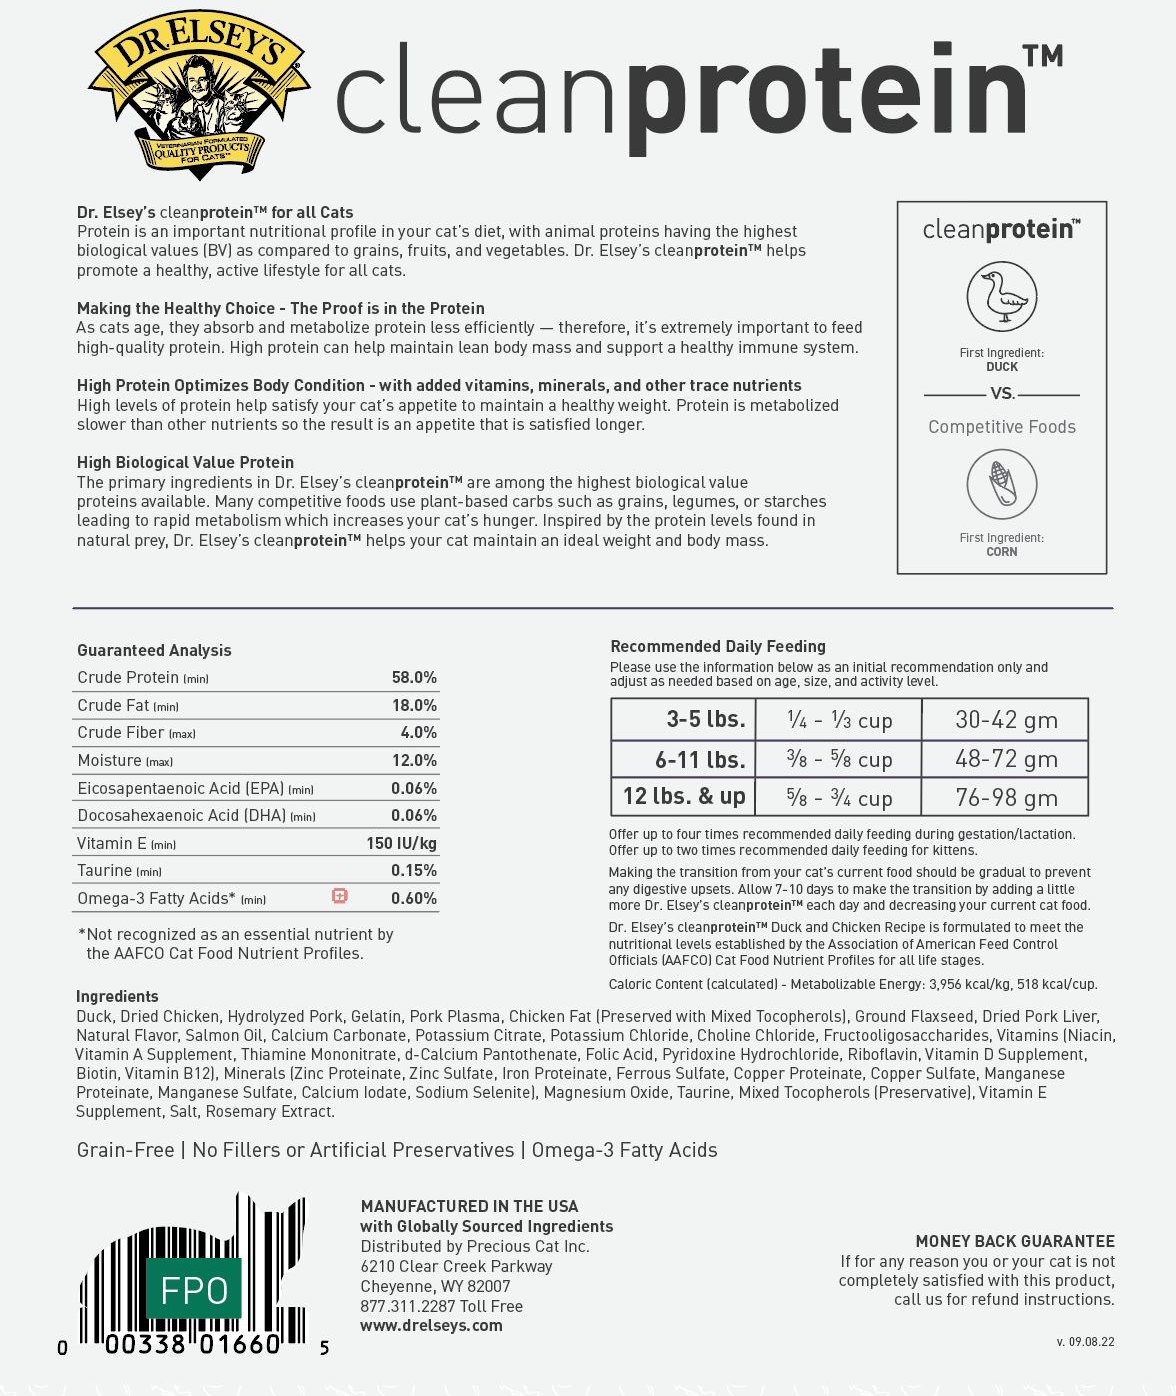 DR. ELSEY'S Clean Protein Duck Recipe GrainFree Dry Cat Food, 6.6lb